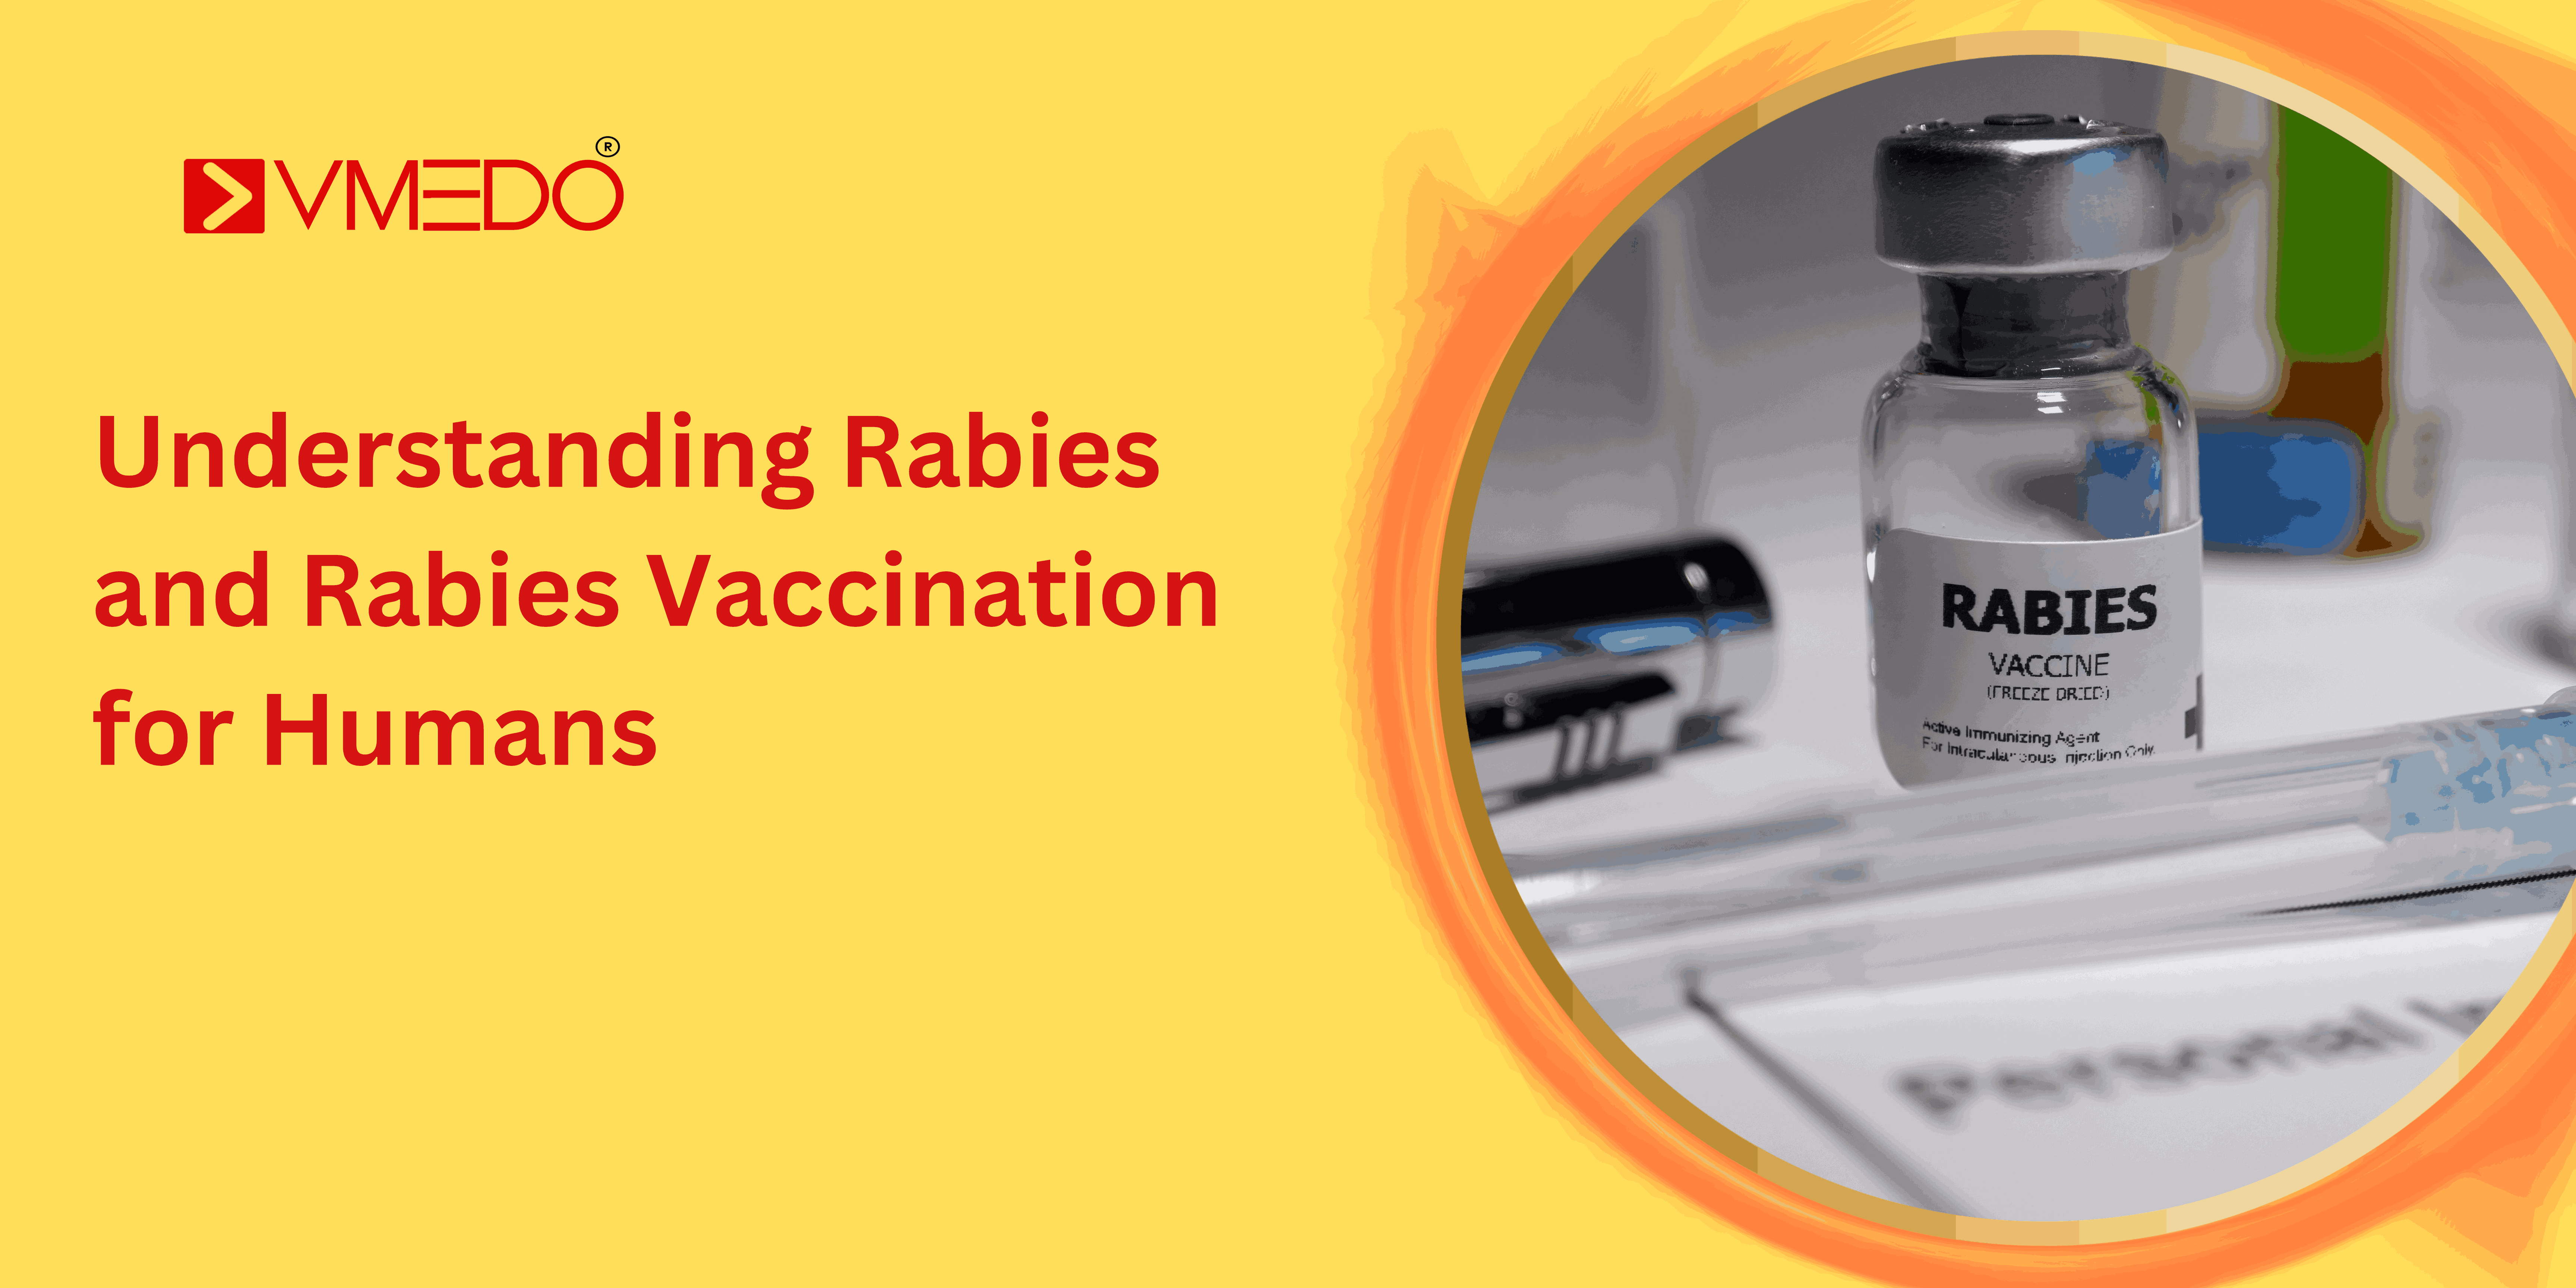 Know more about Rabies and Rabies vaccinations for humans